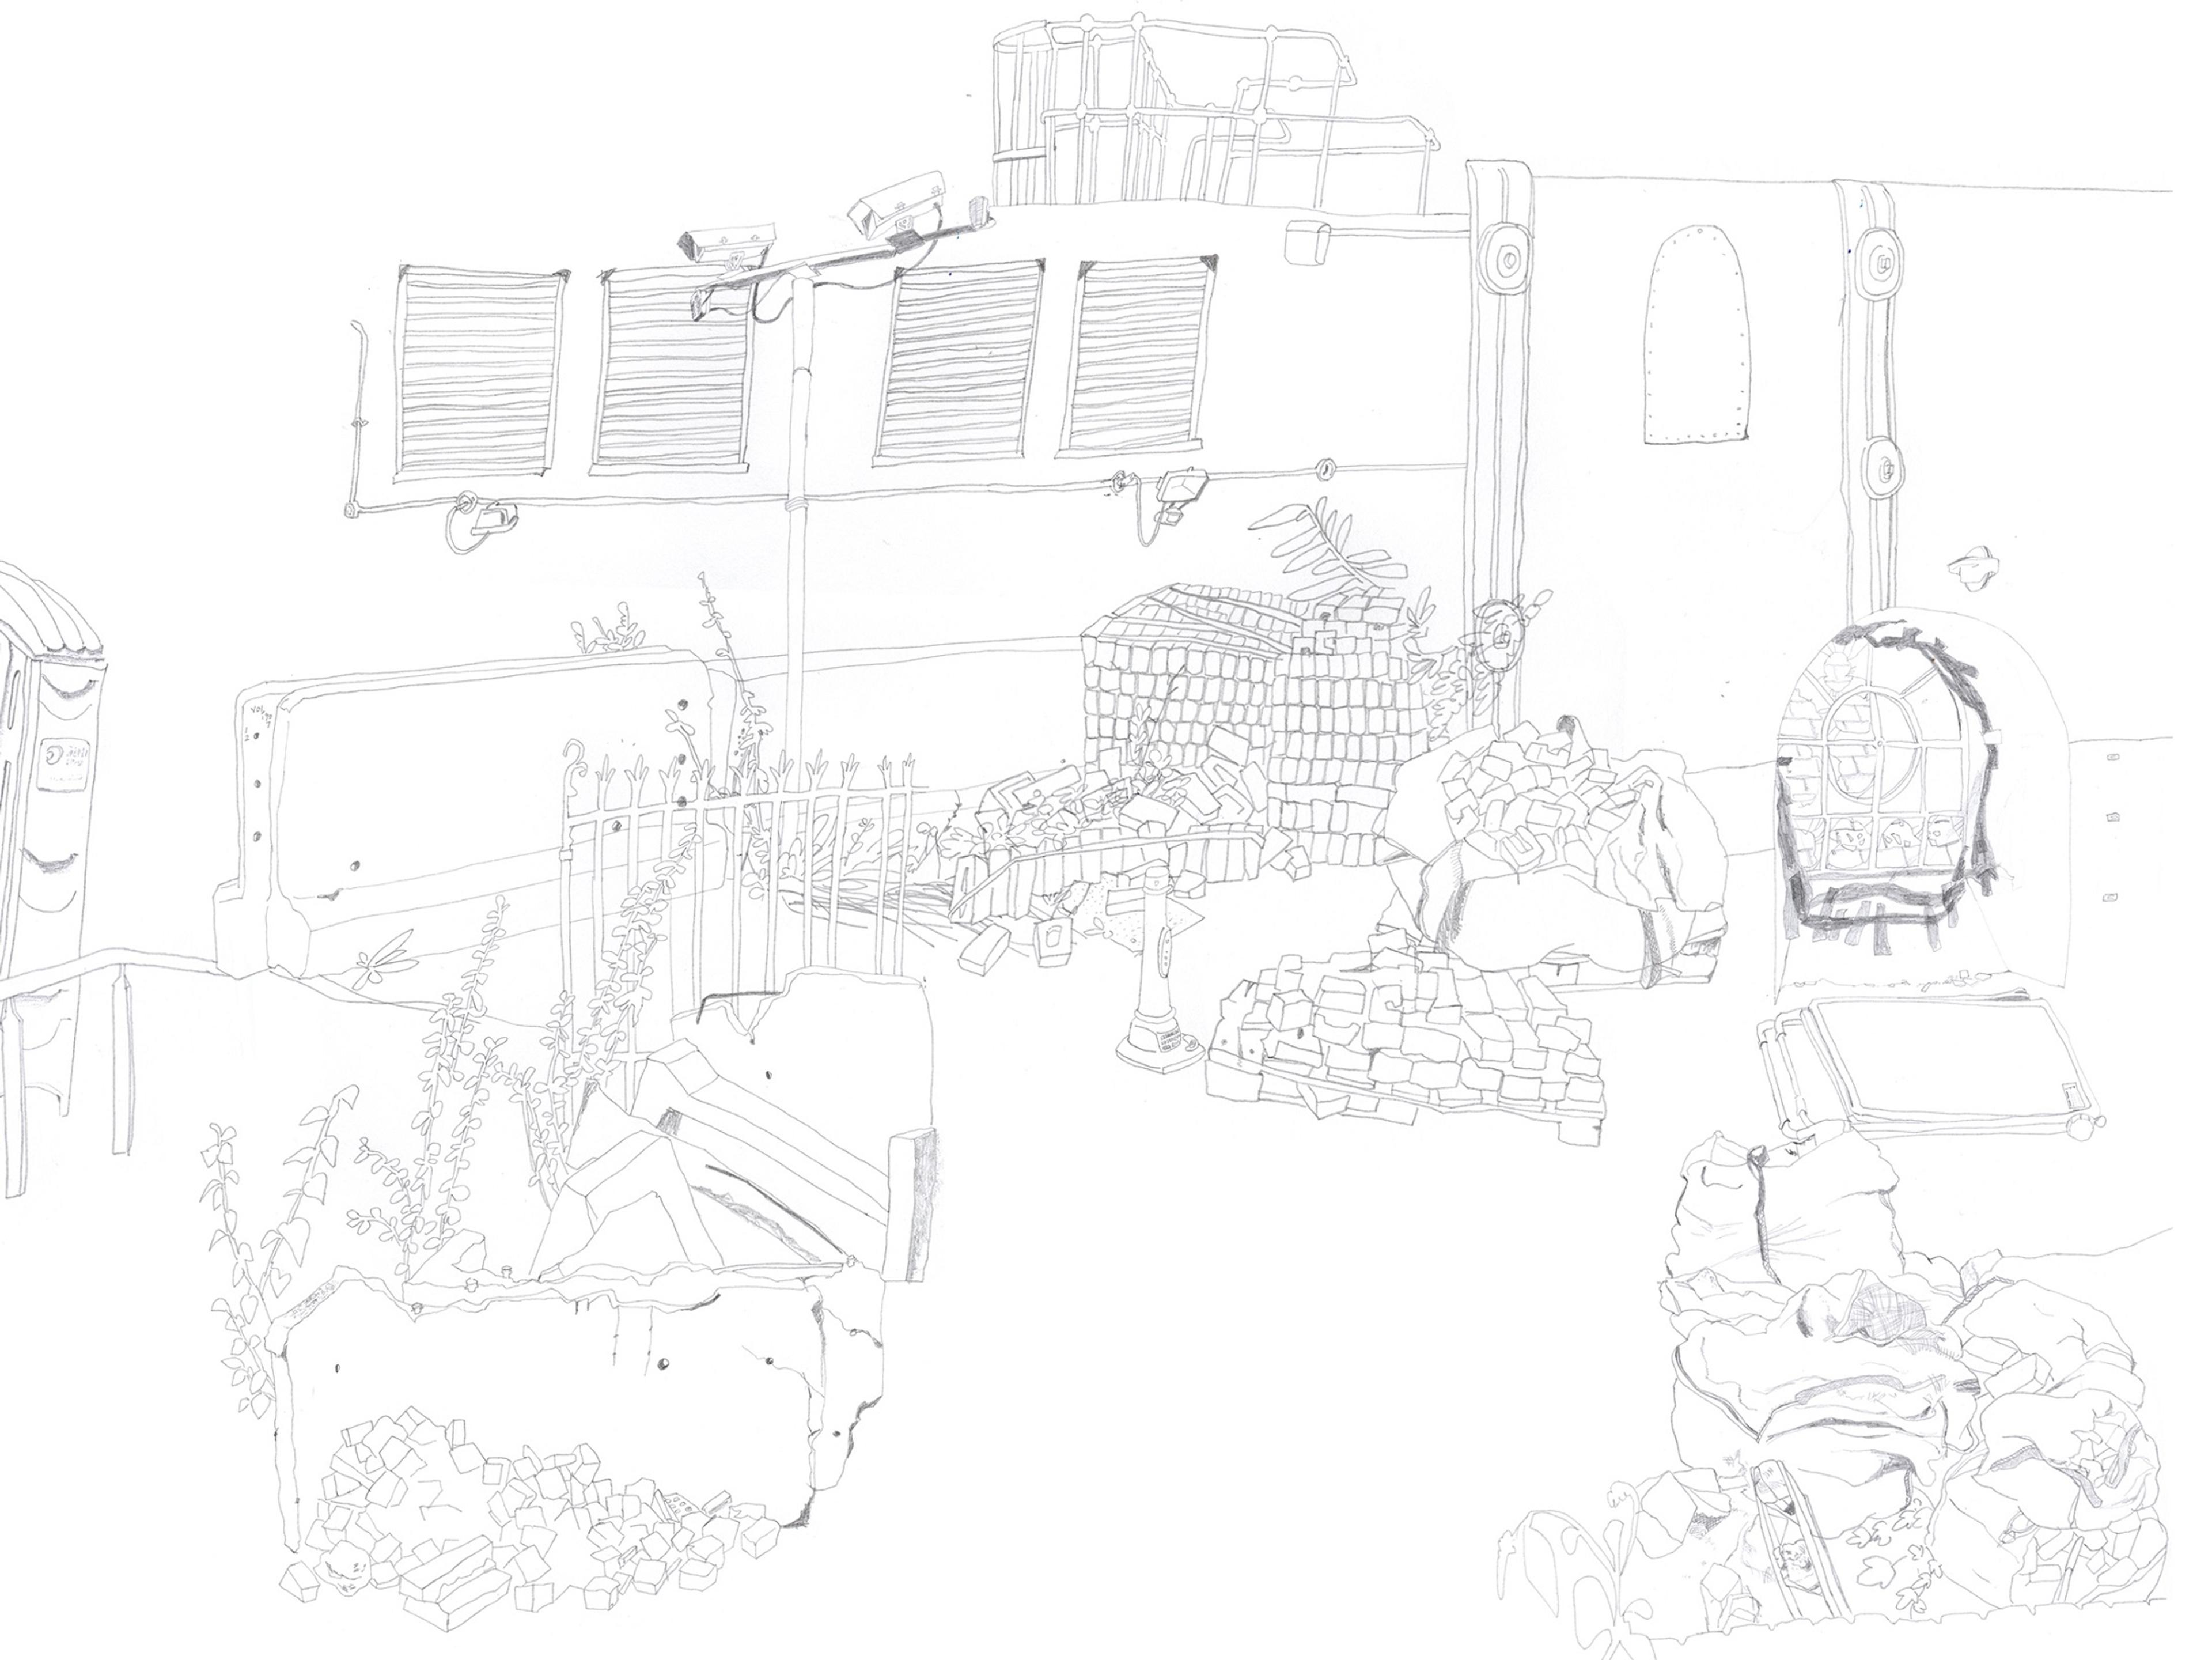 Pencil drawing of fragments of abandoned heritage site